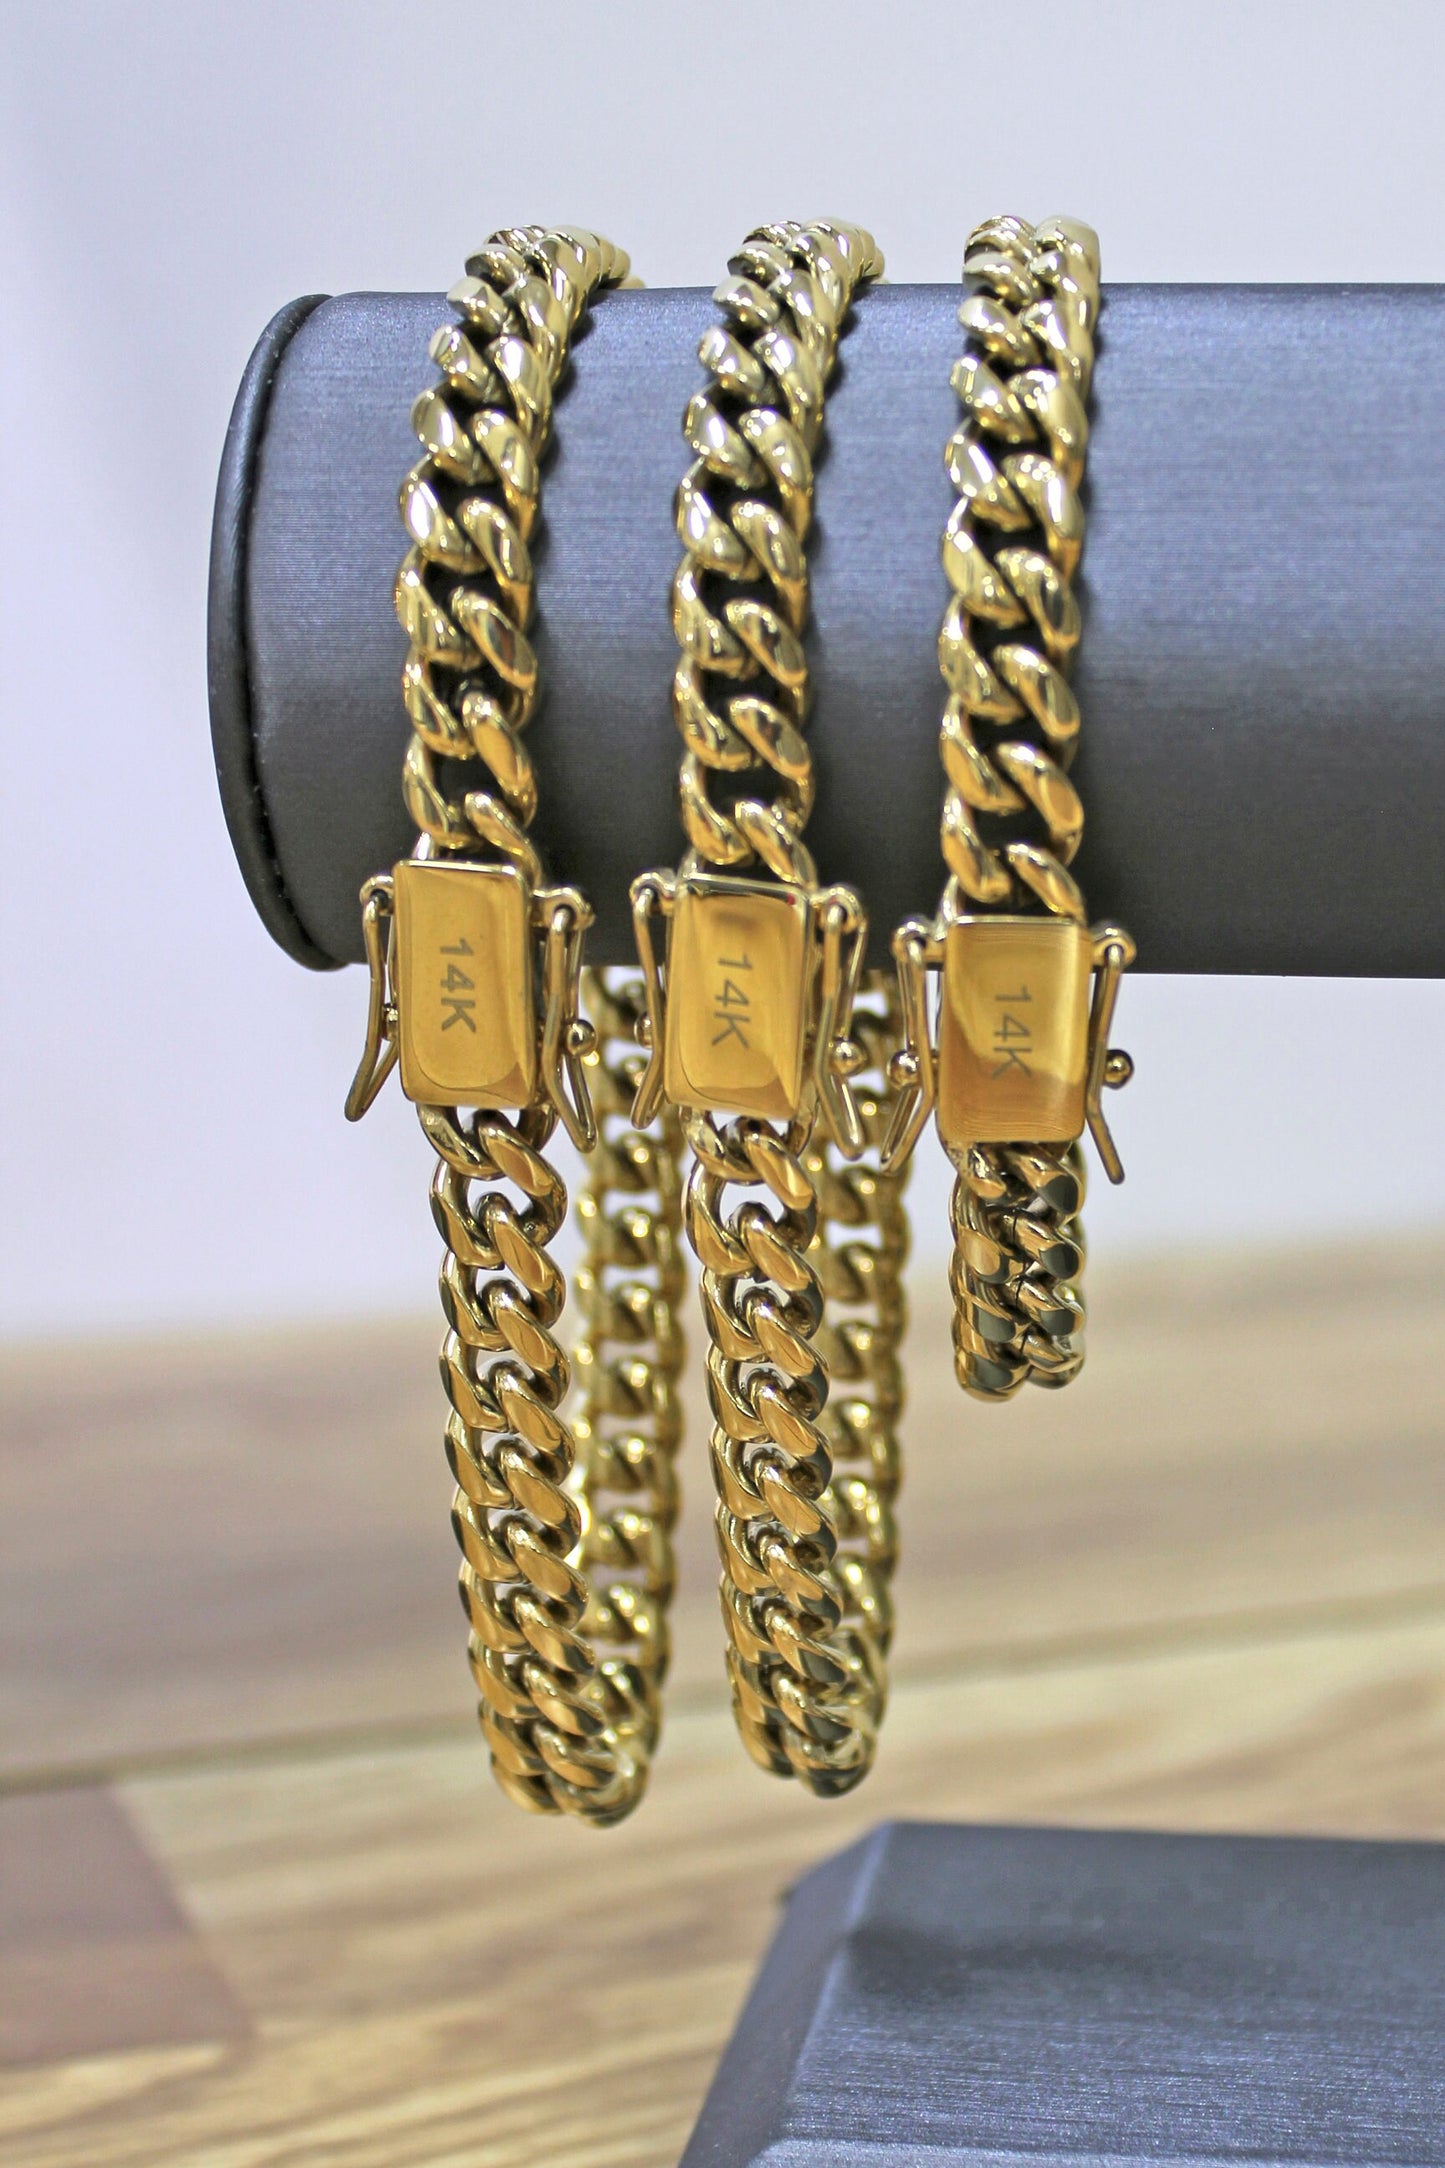 8mm Miami Cuban Link Bracelet In 14k Gold Filled Featuring Double Safety Lock Box Clasp, Unisex Curb Chain, Wholesale Jewelry Supplies